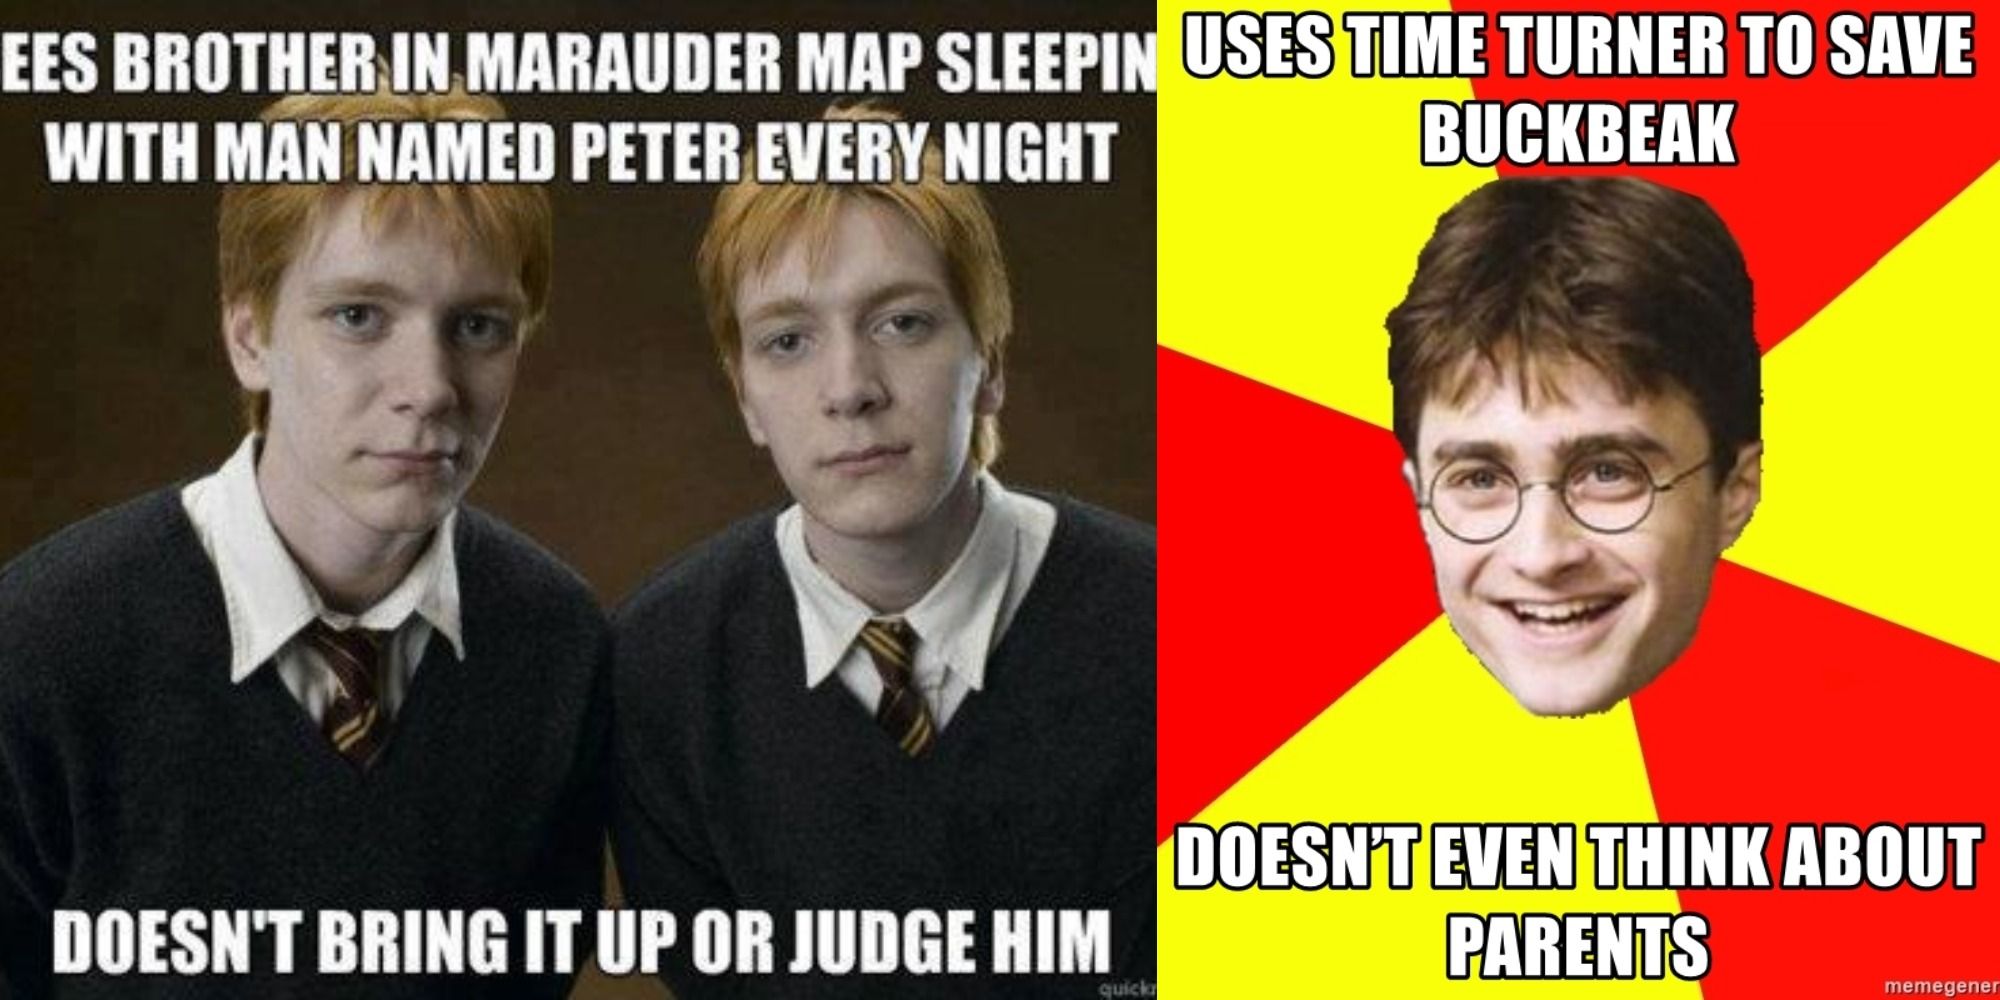 Harry Potter Memes For Those Still Waiting For Their Hogwarts